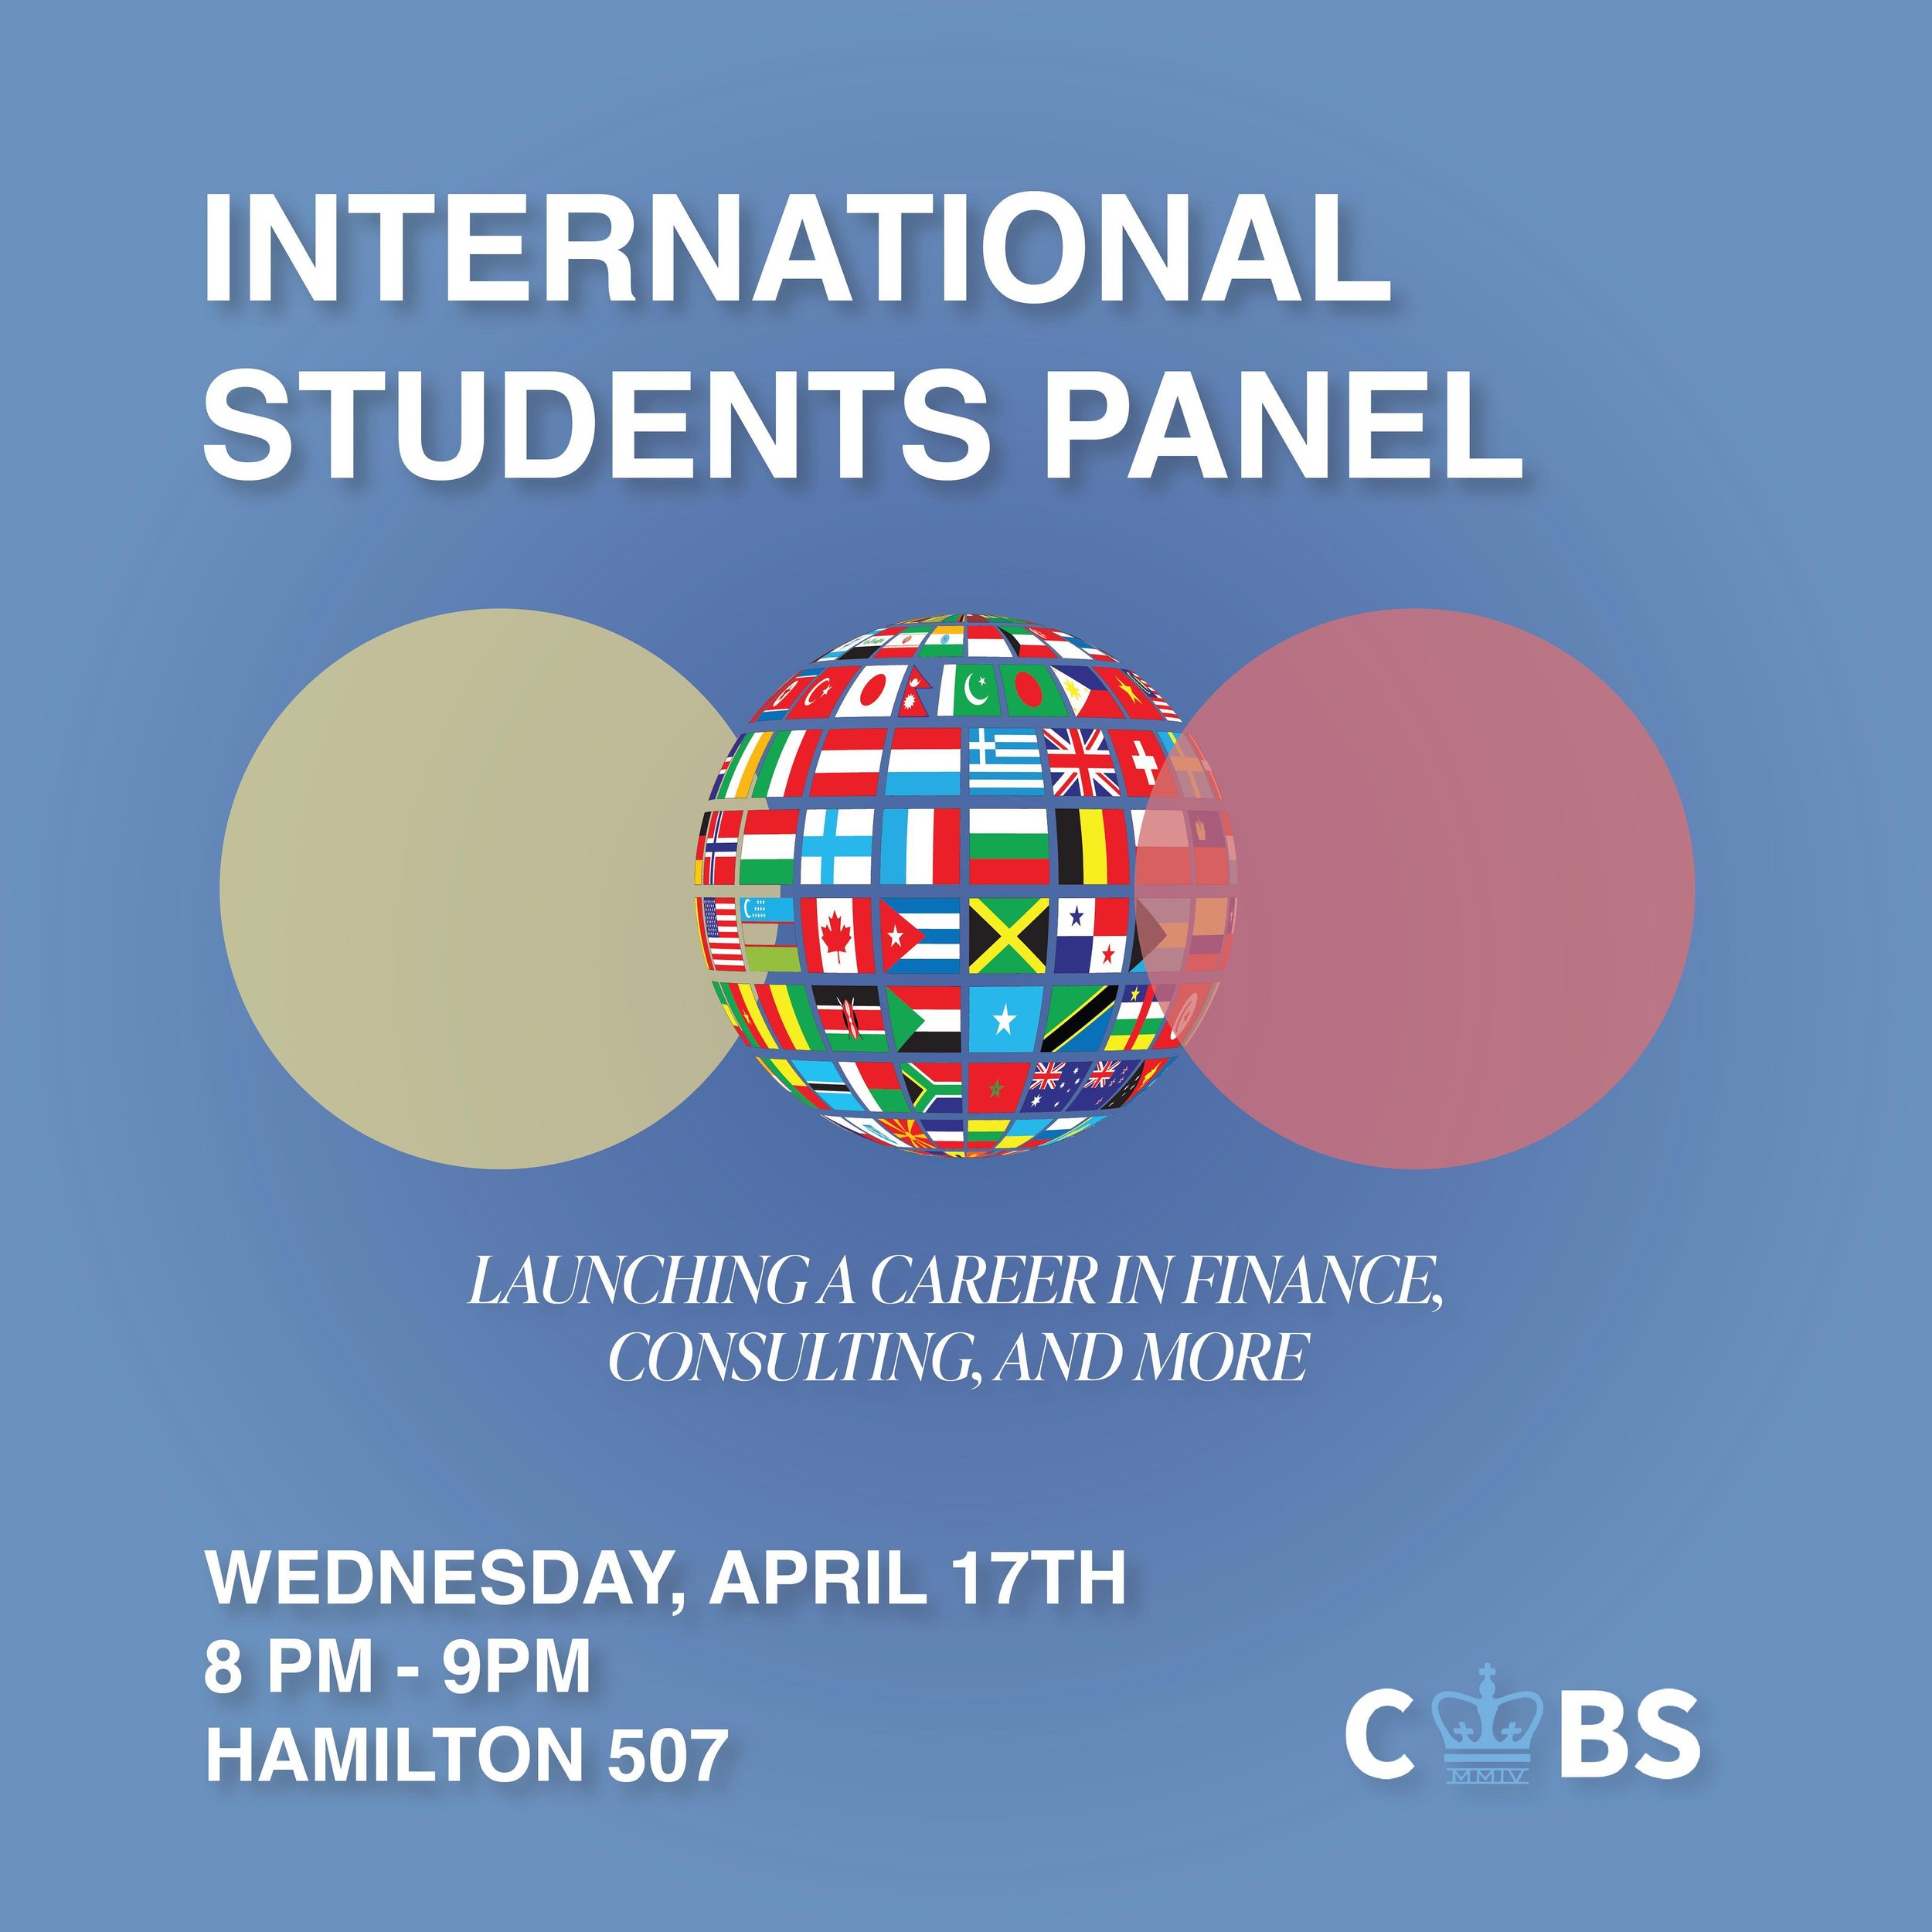 Hi CWBS! Join us this upcoming Wednesday to hear from international students on their experiences with recruitment in finance, consulting, and more. Whether it is sponsorships or navigating interviews as an international student, this panel will answ